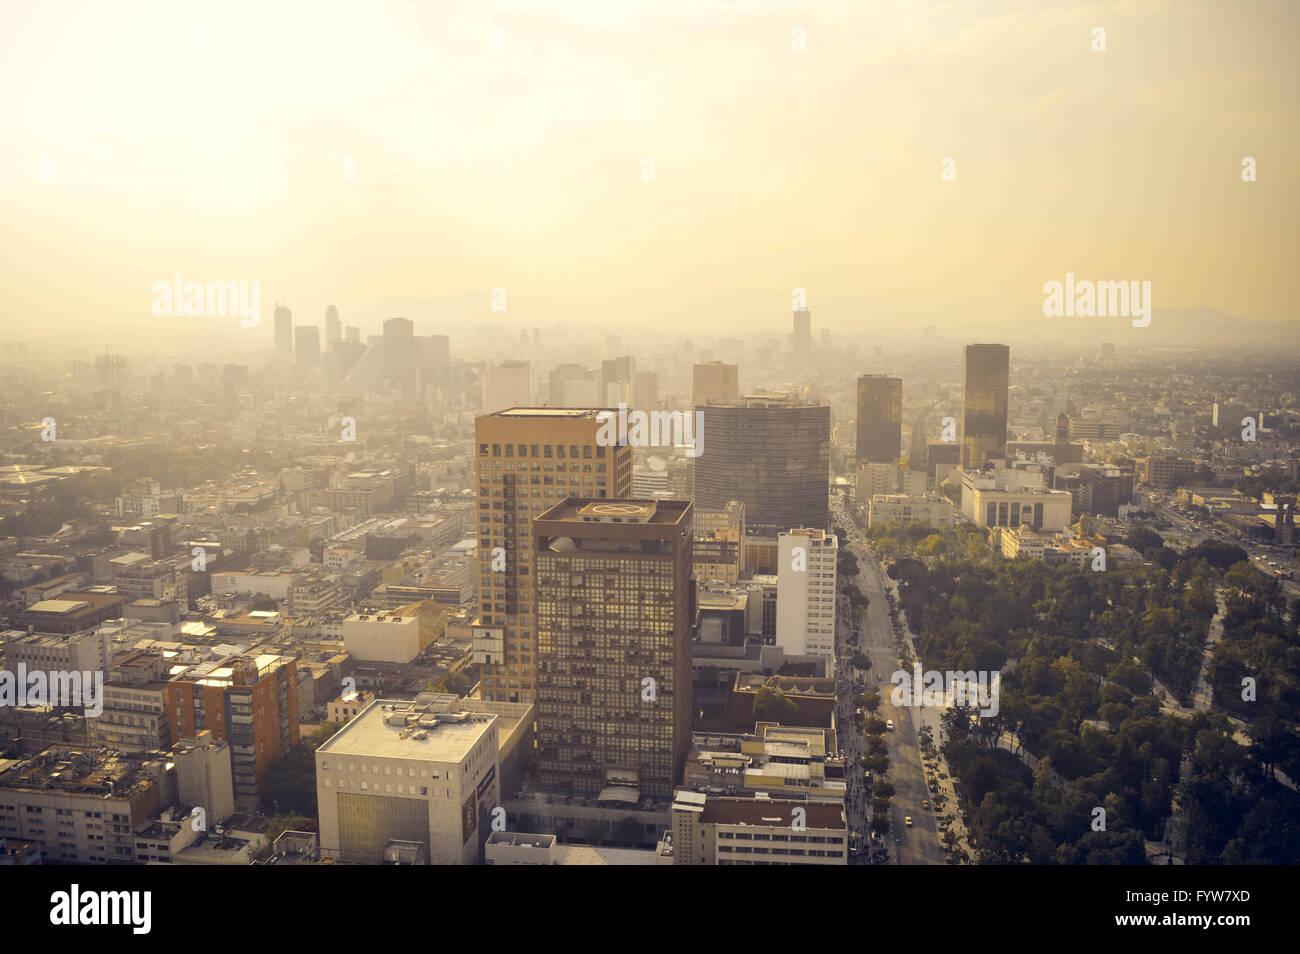 Mexico city industrial part covered in haze on sunset, Mexico Stock Photo